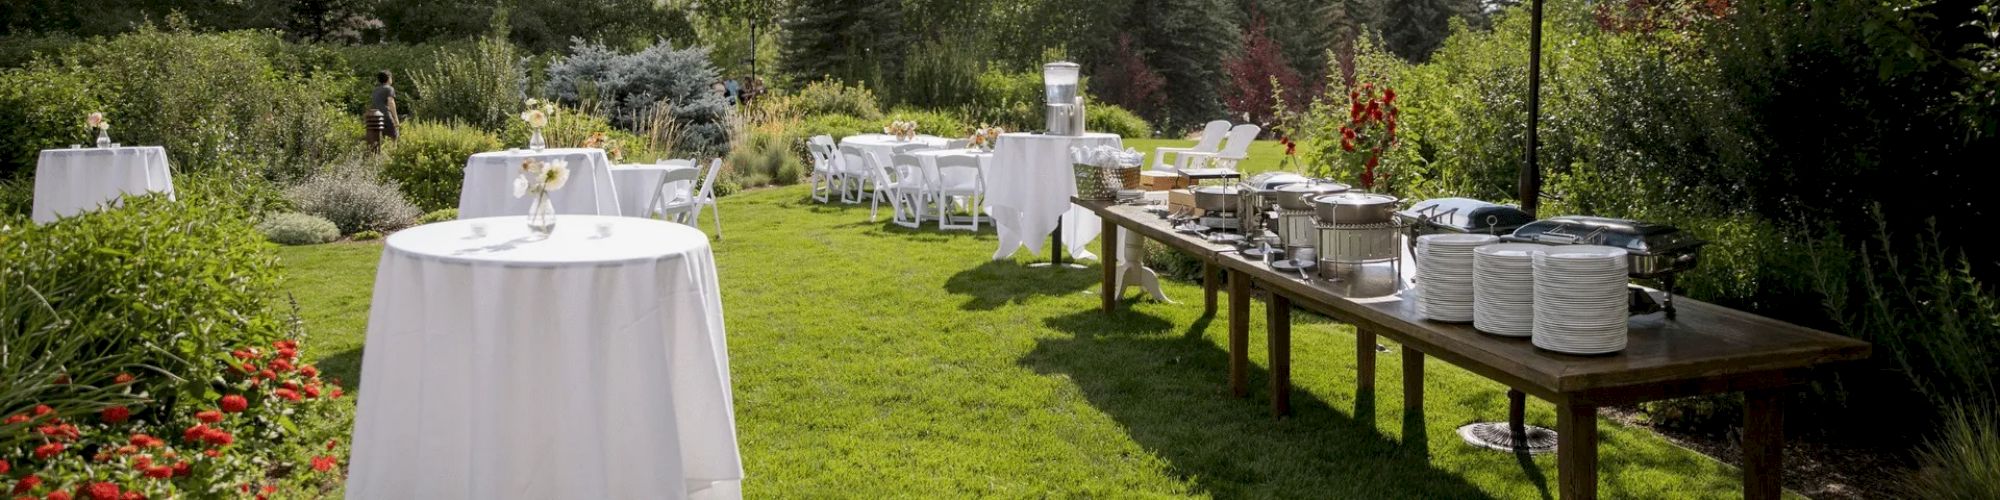 A garden setup with tables for dining, a buffet with a blue umbrella, surrounded by greenery and trees in the background. Perfect for an outdoor event.